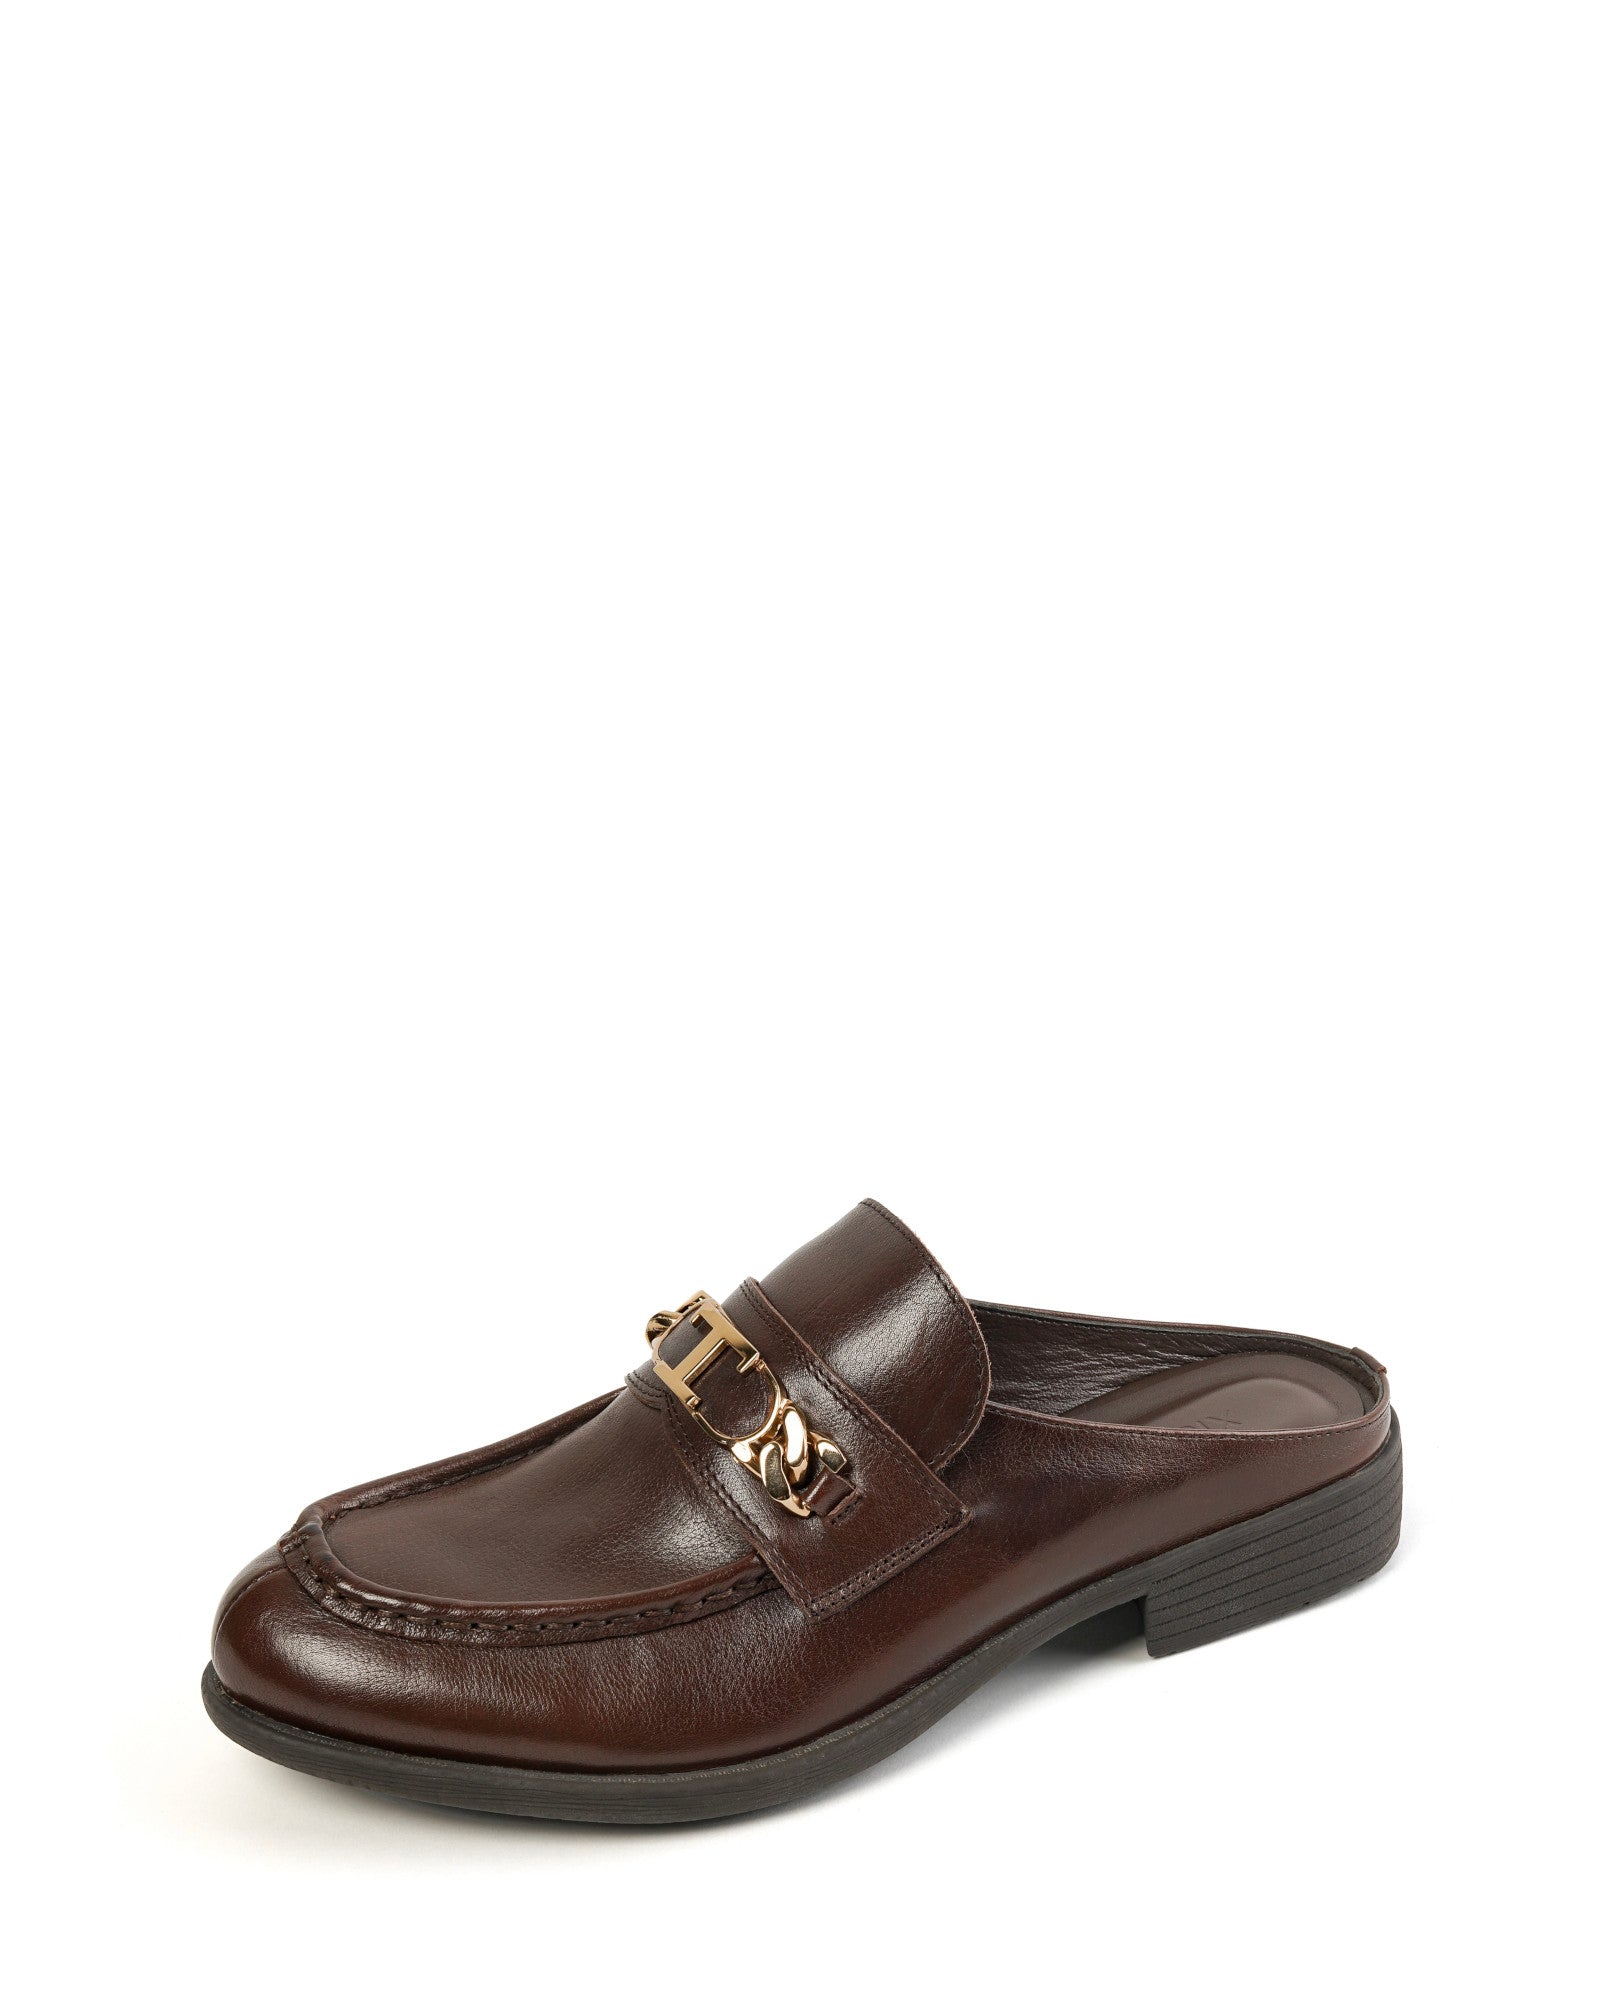 katni-mule-loafers-brown-leather